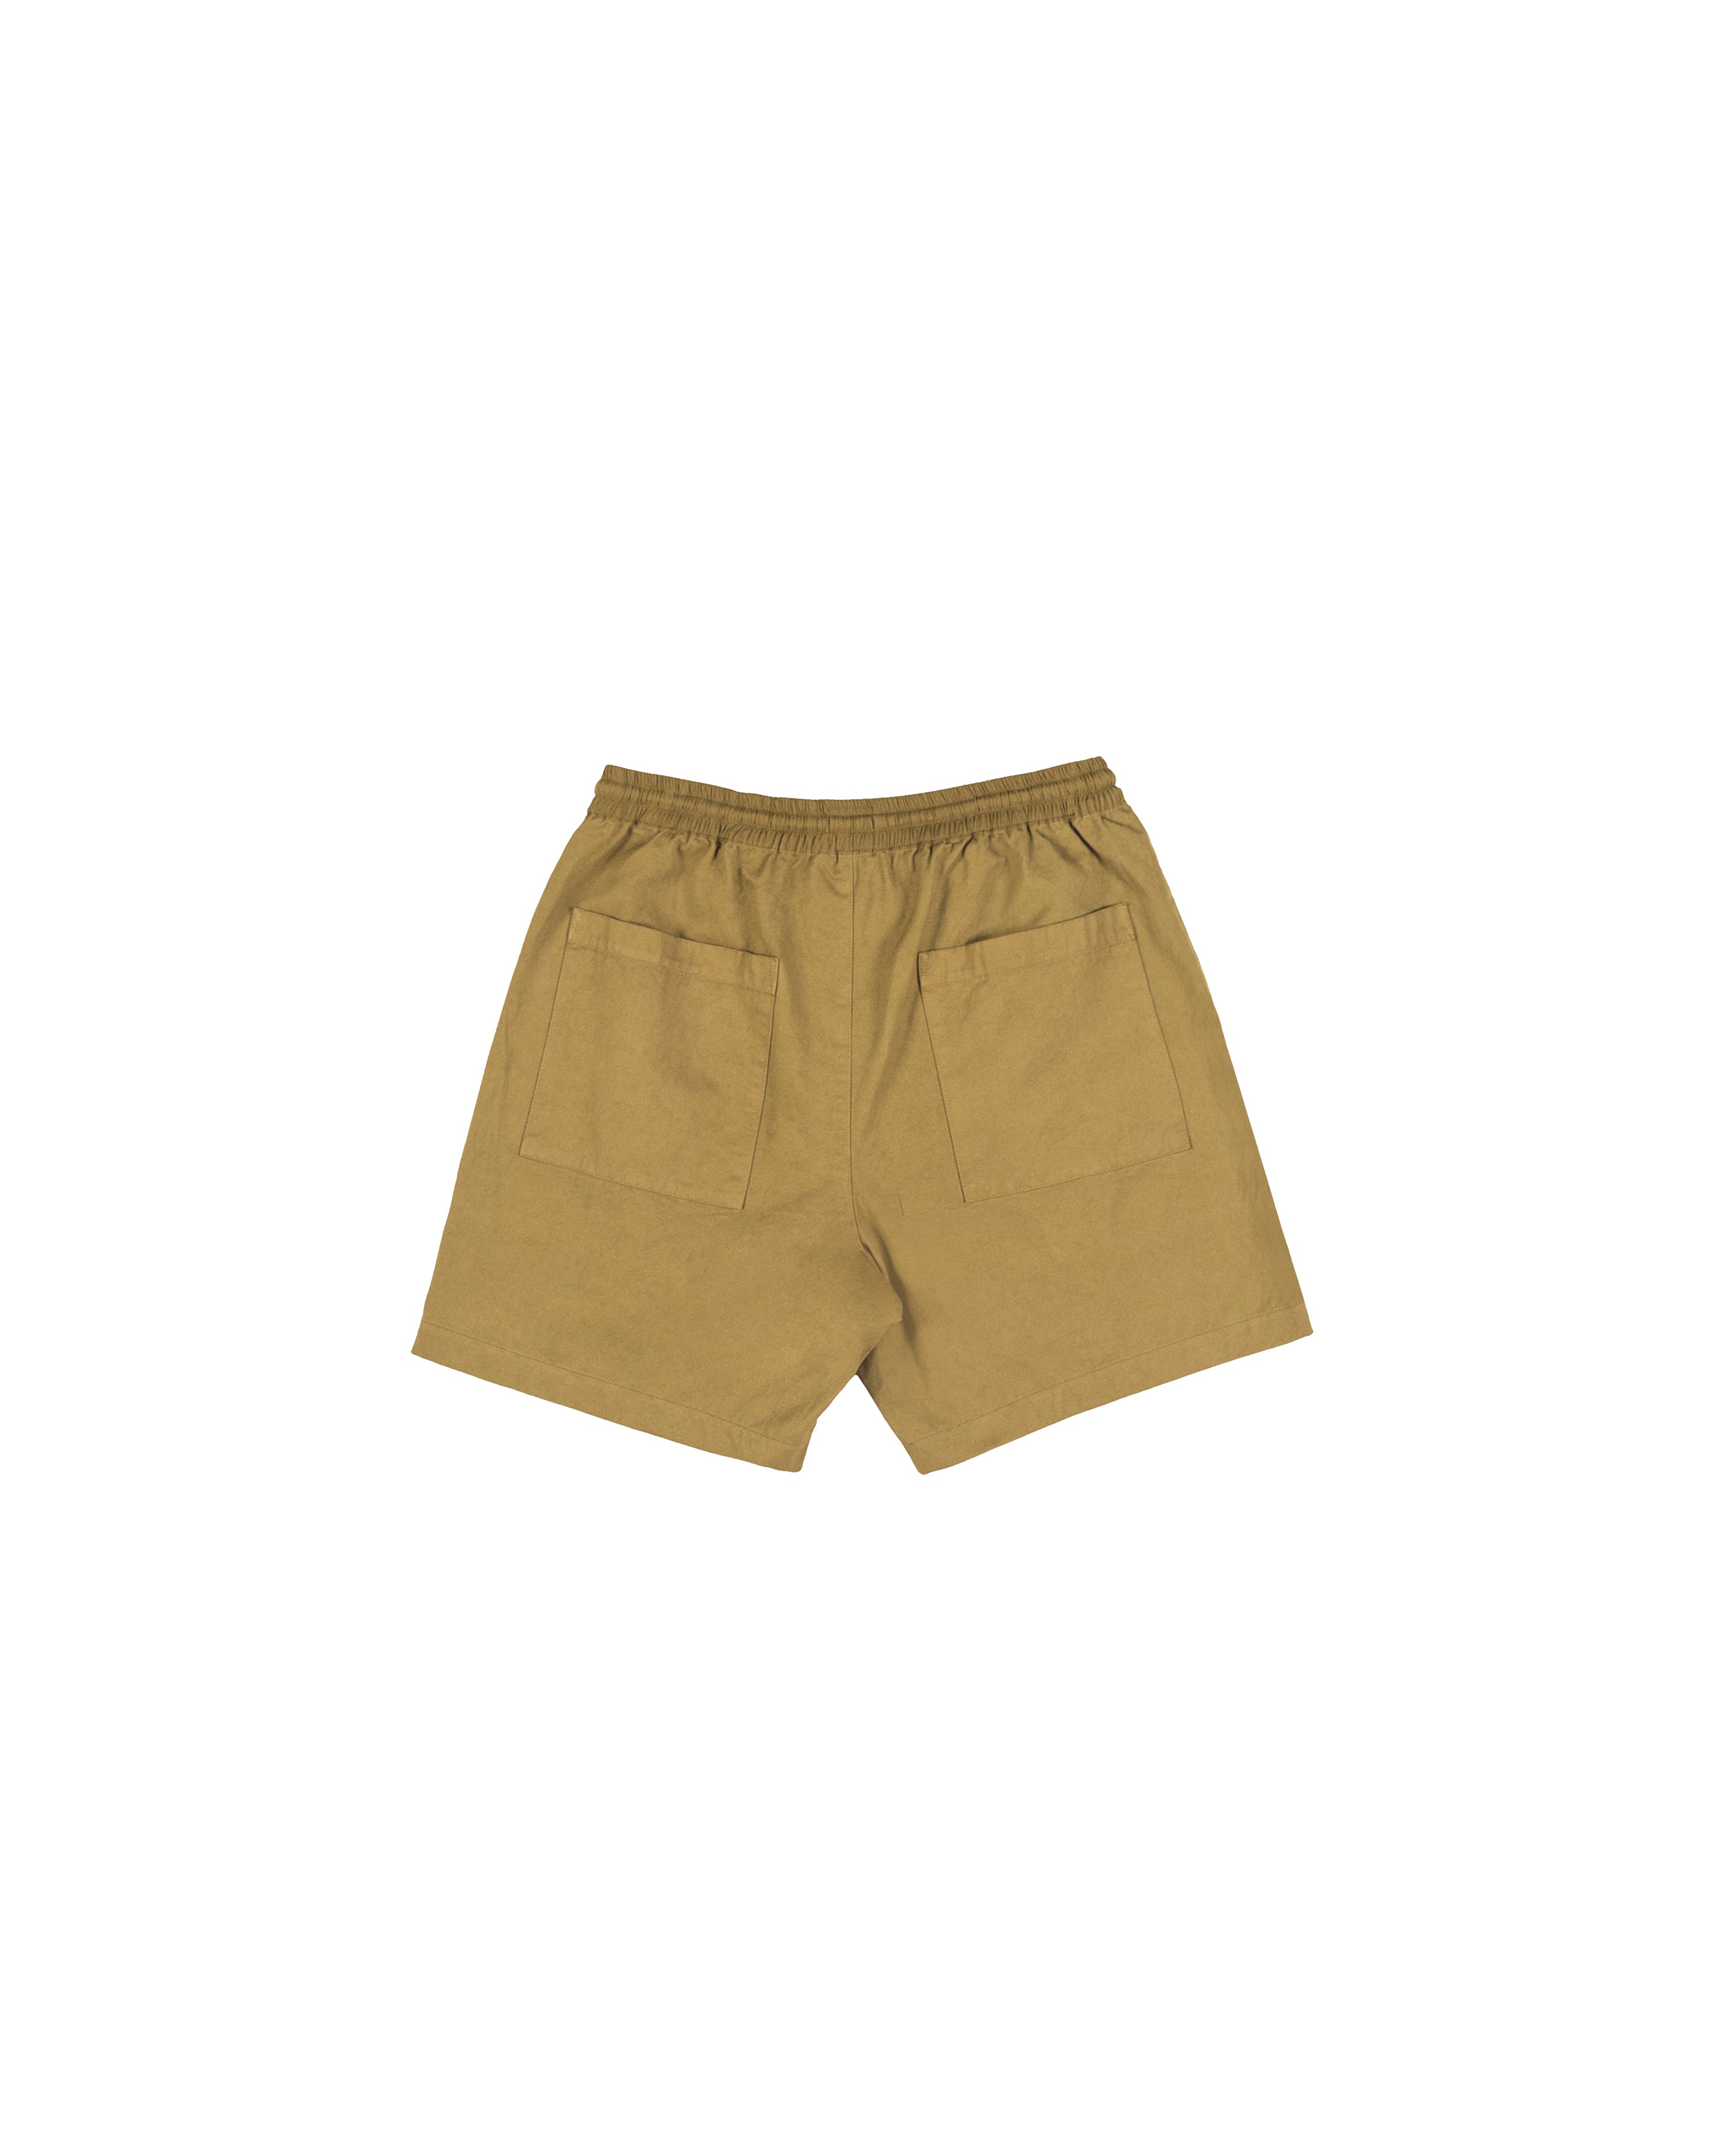 Cosmos Short - Olive - Washed Twill